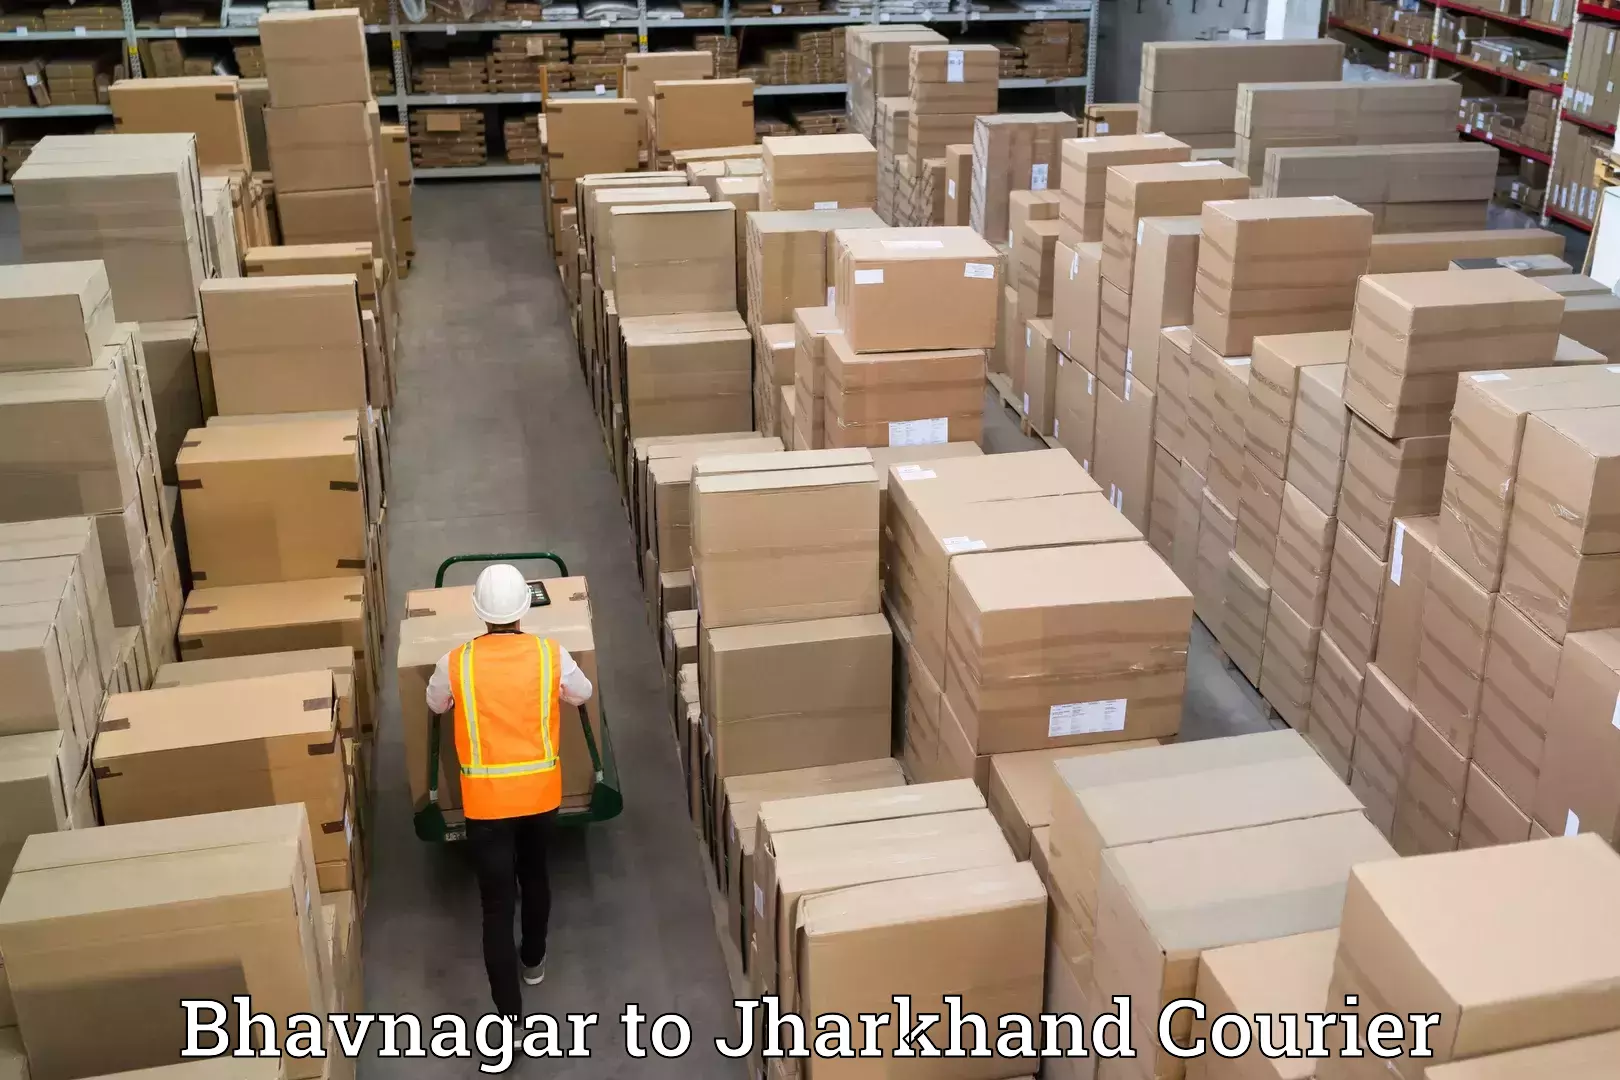 Furniture relocation experts Bhavnagar to Jharkhand